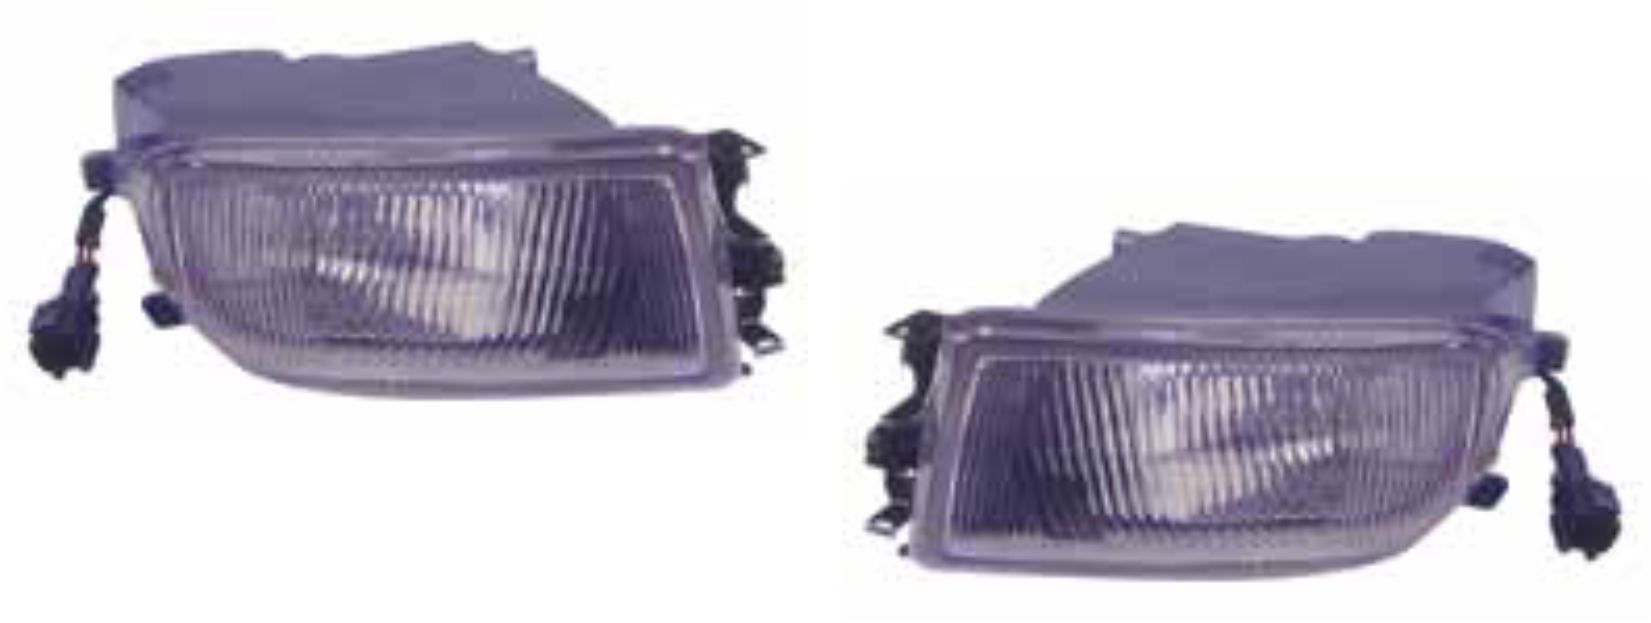 FGL500689 - B14 96 FROSTED FOG LAMP (PAIR) ............2004162